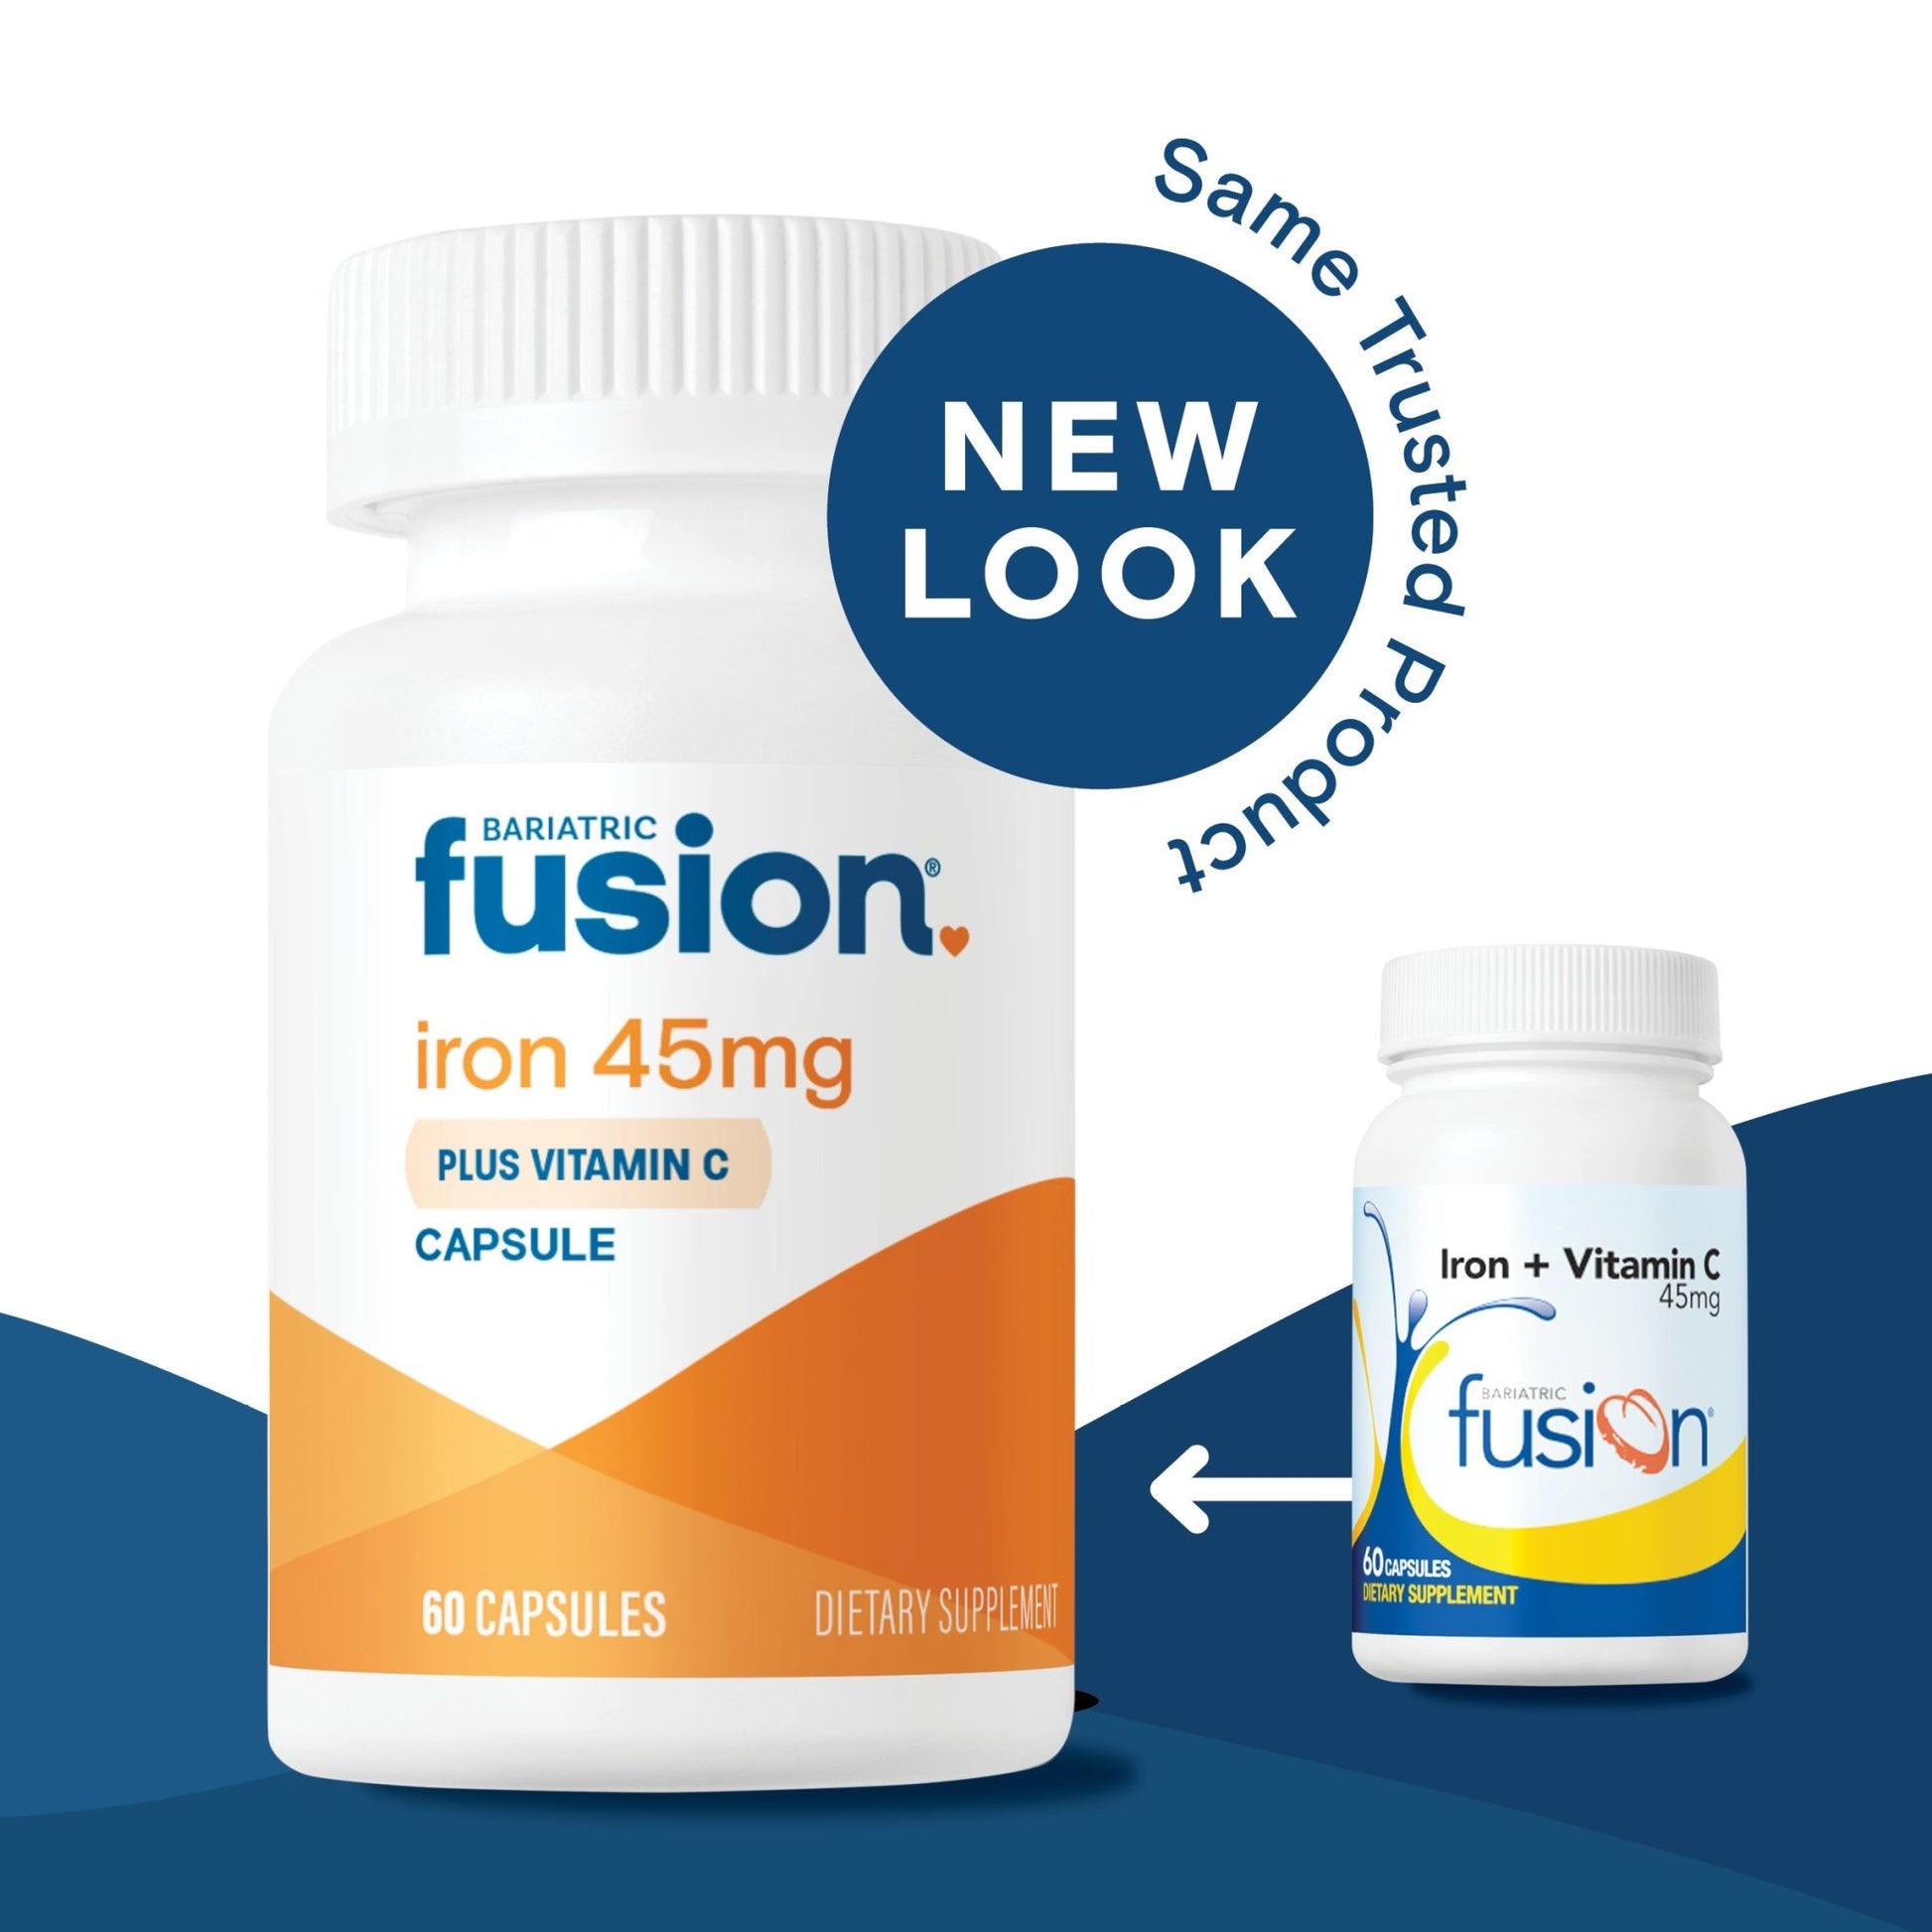 Bariatric Iron Capsule with Vitamin C new look, same trusted product.